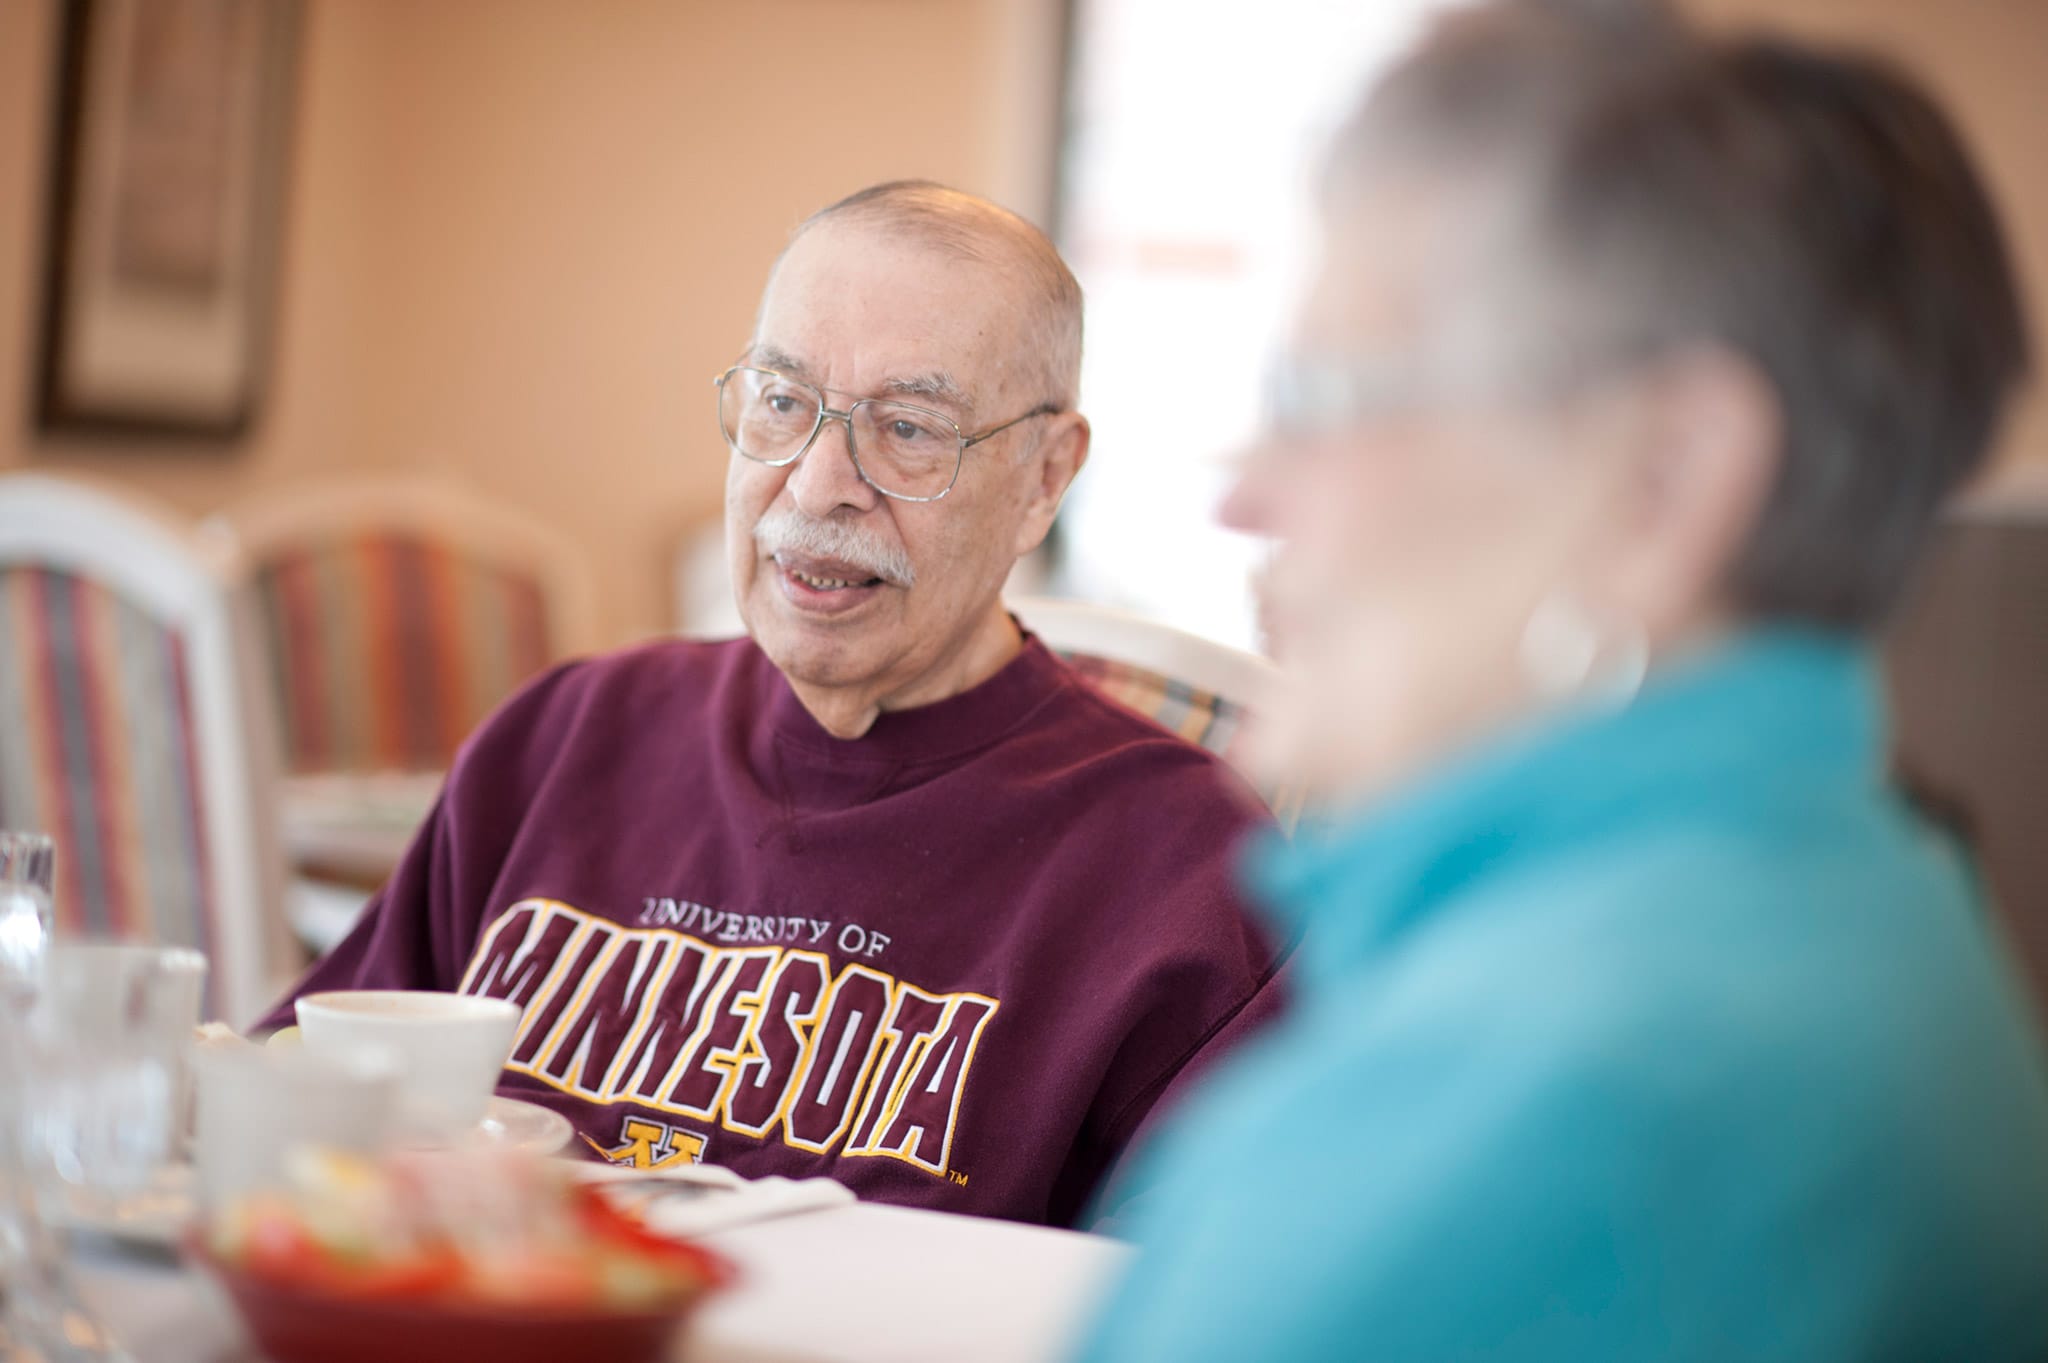 How seniors can build community in new surroundings